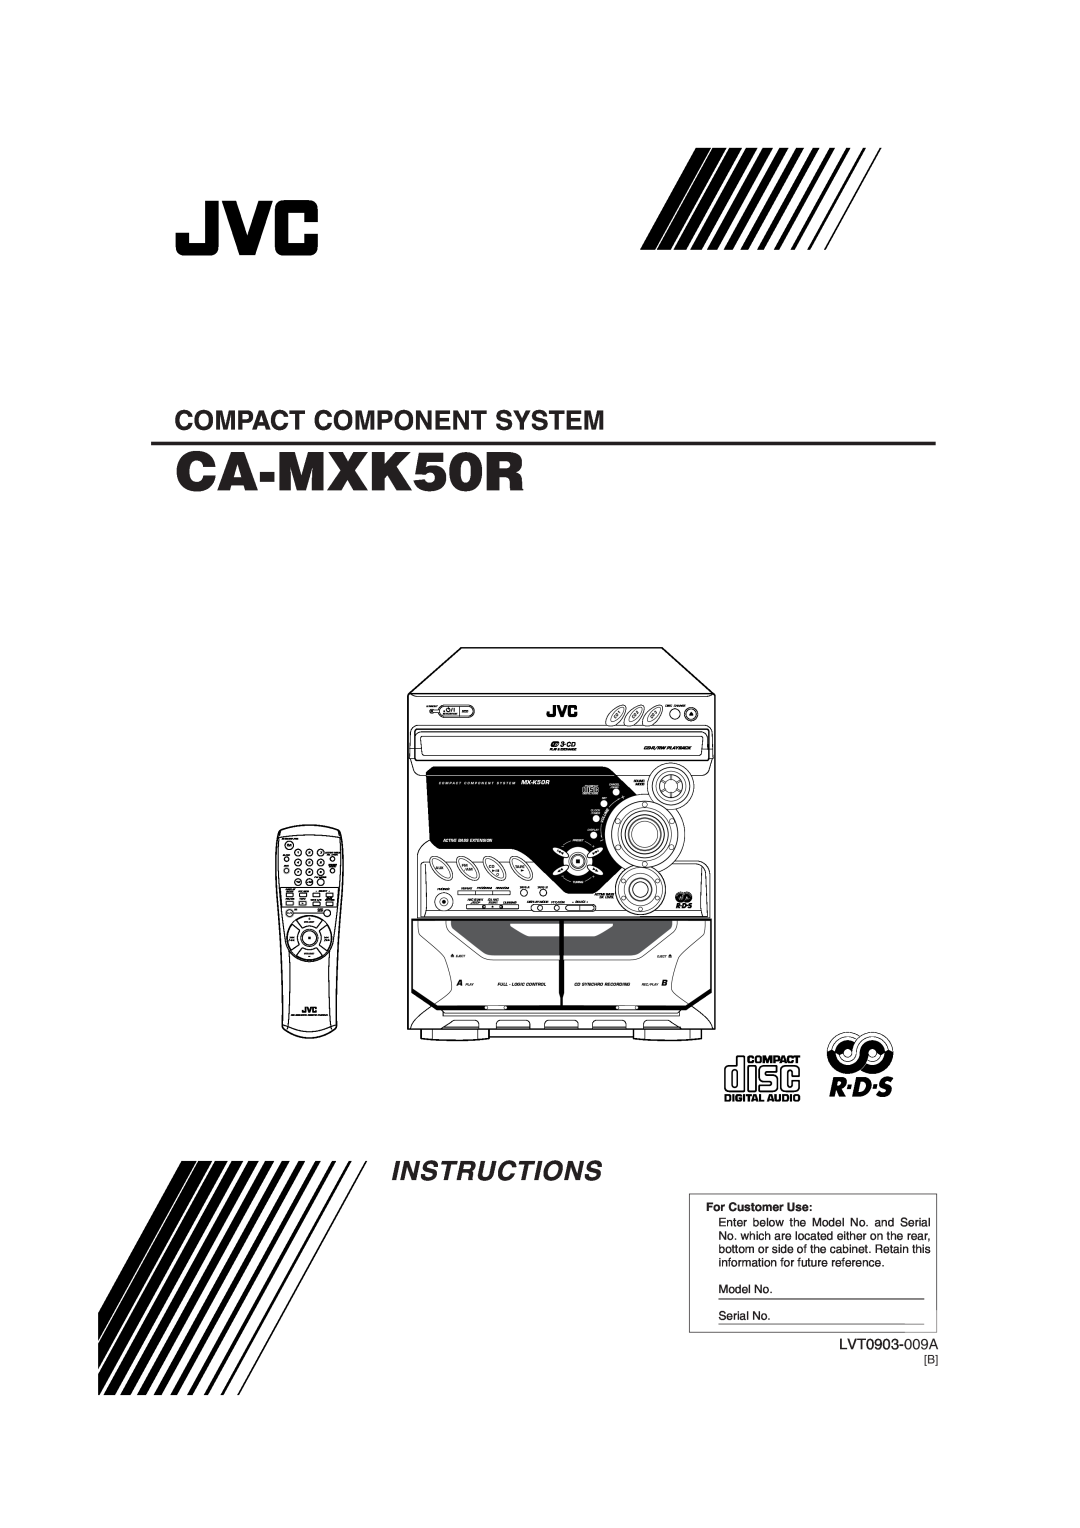 JVC CA-MXK50R manual LVT0903-009A, Compact Component System, Instructions, For Customer Use, 3 CD, MX-K50R, Disc Change 